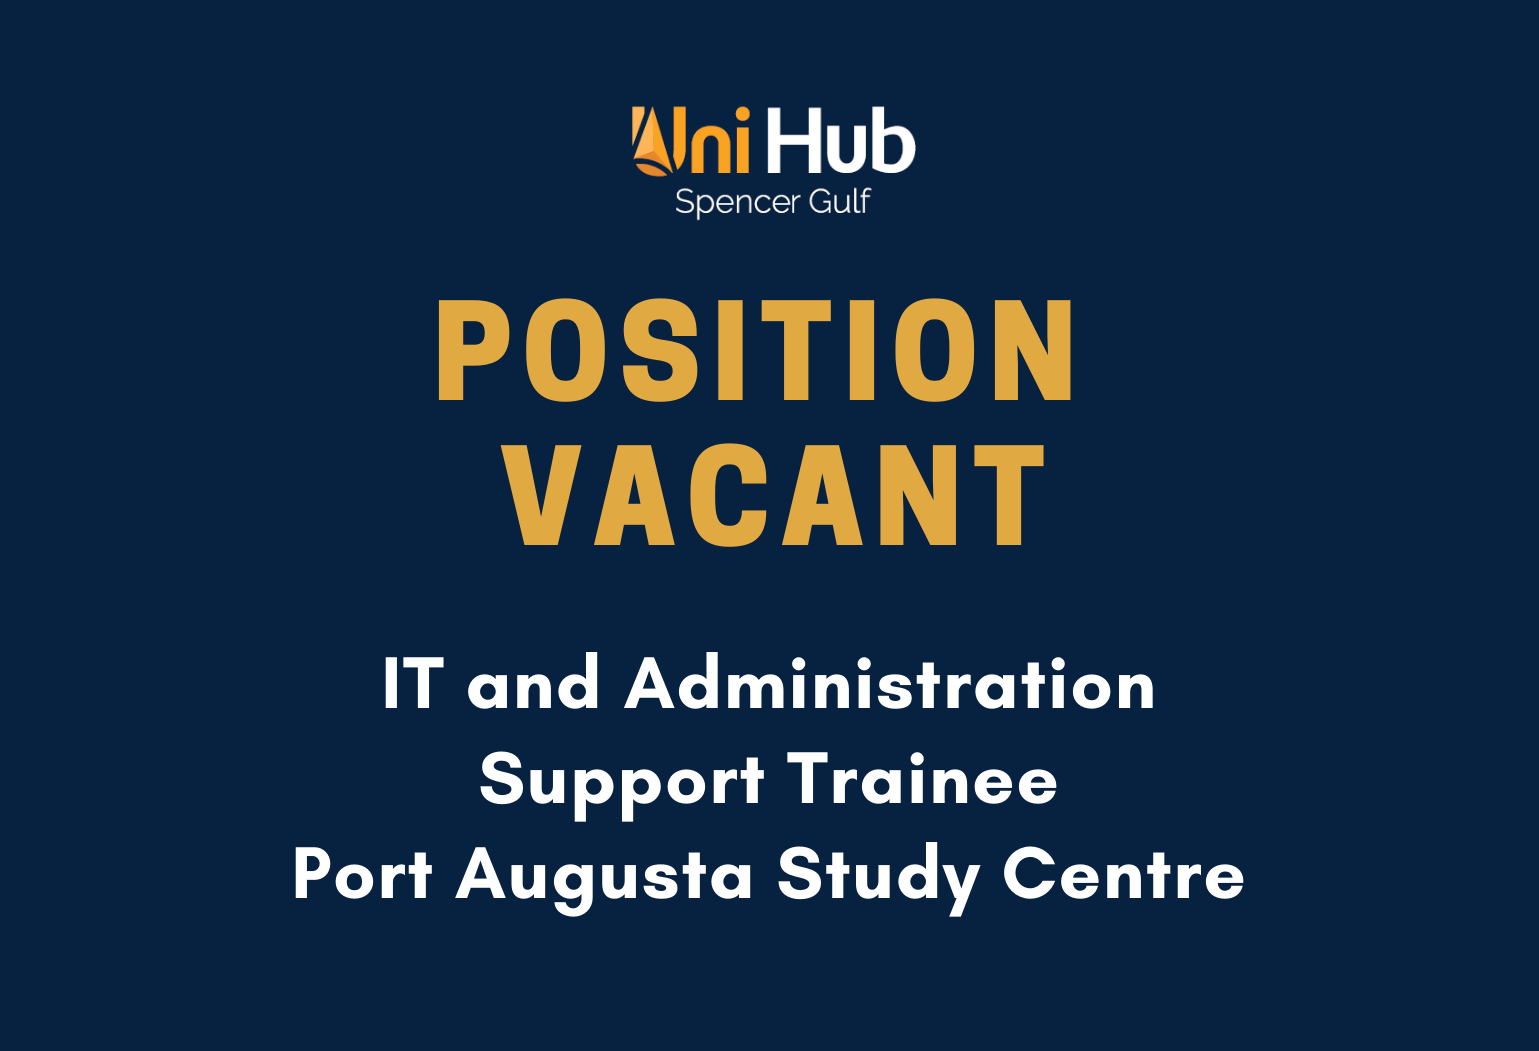 Position vacant